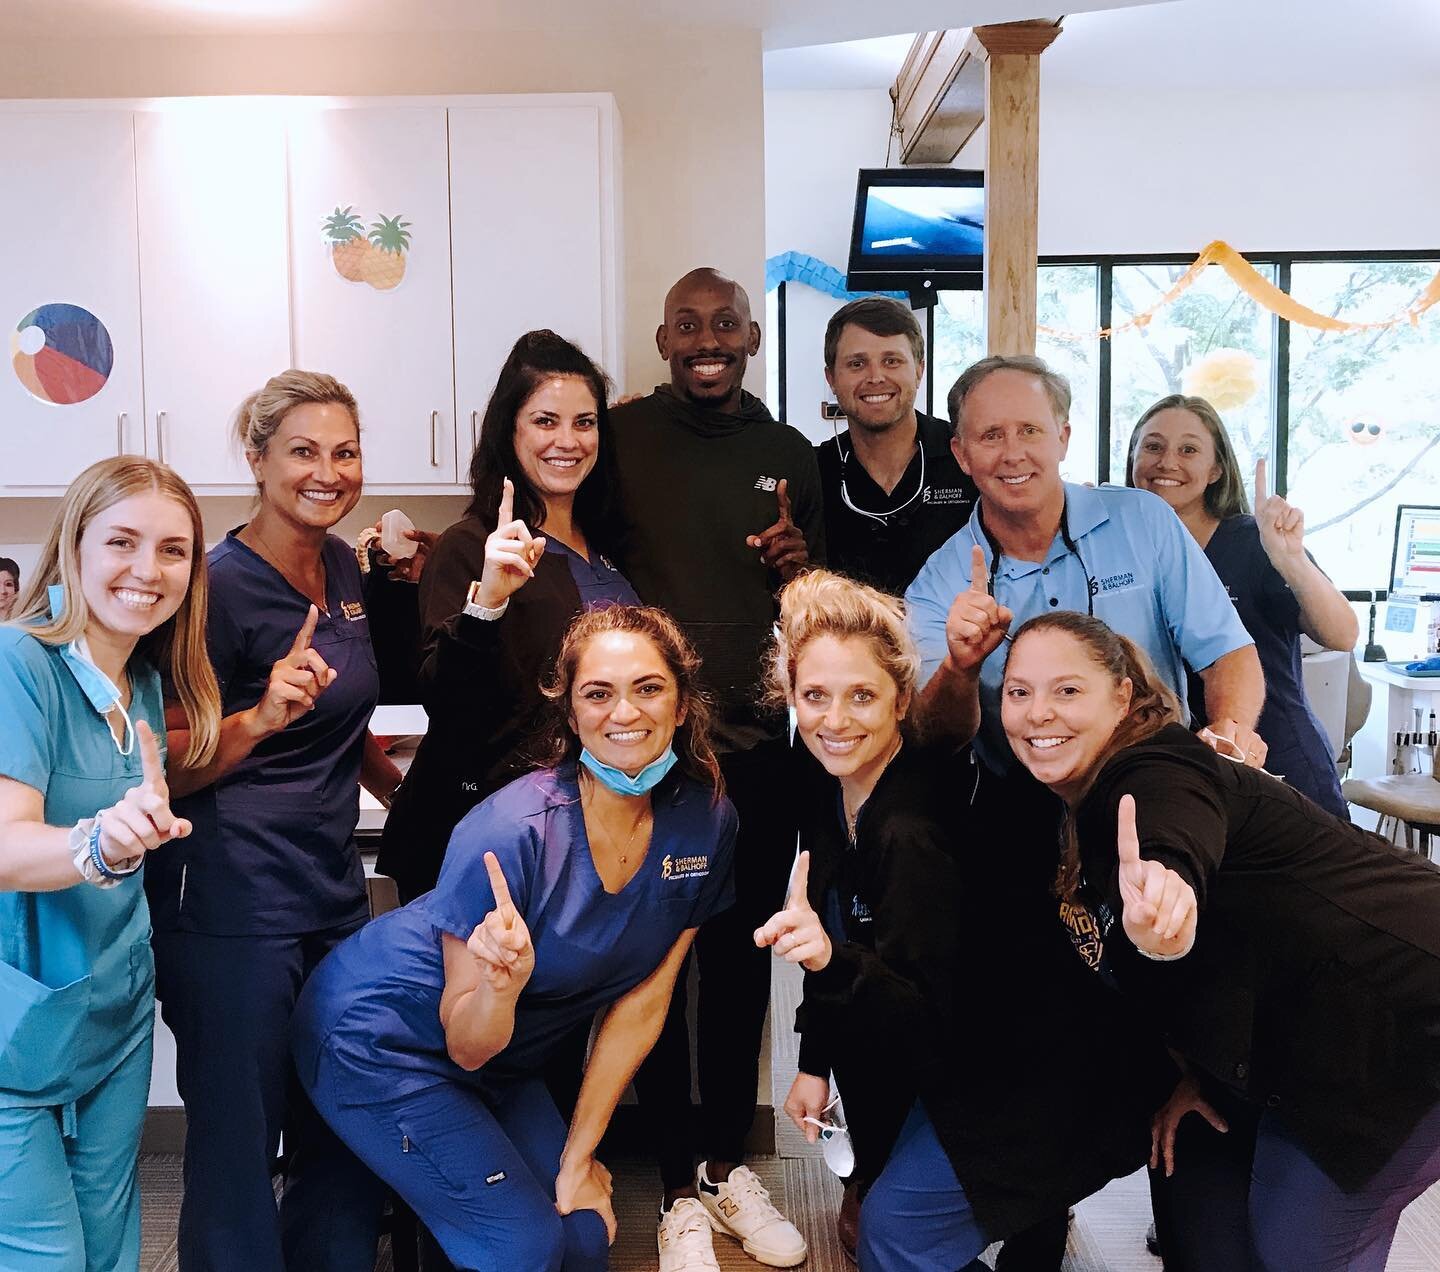 TOKYO 2021 OLYMPICS HERE WE COME!! 🎉🙌🏅✨ We say it all the time but we really do have the greatest patients. Our friend @vernon400m is on his way to compete in the 4x400 relay with his beautiful smile. We are so proud of you Vernon!! Help us wish V